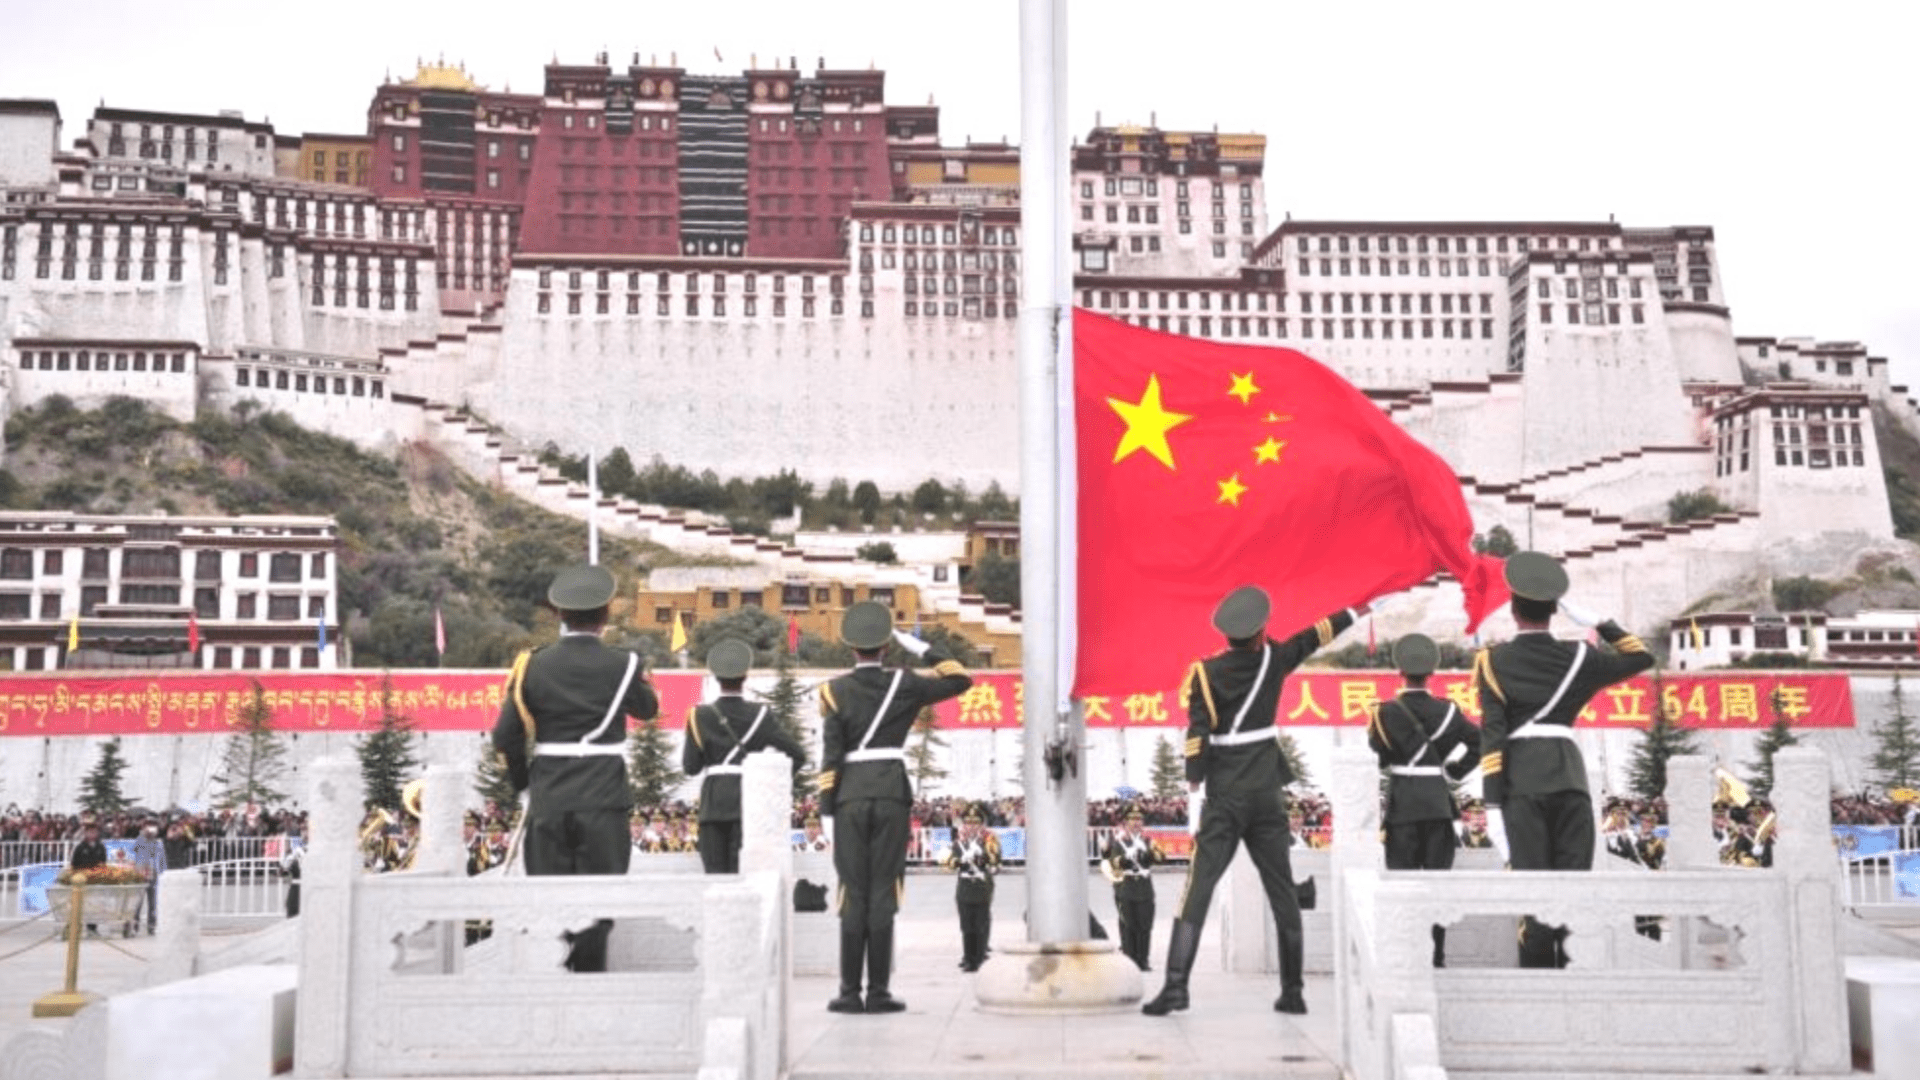 The flag of the People's Republic of China in front of the Potala Palace in Lhasa